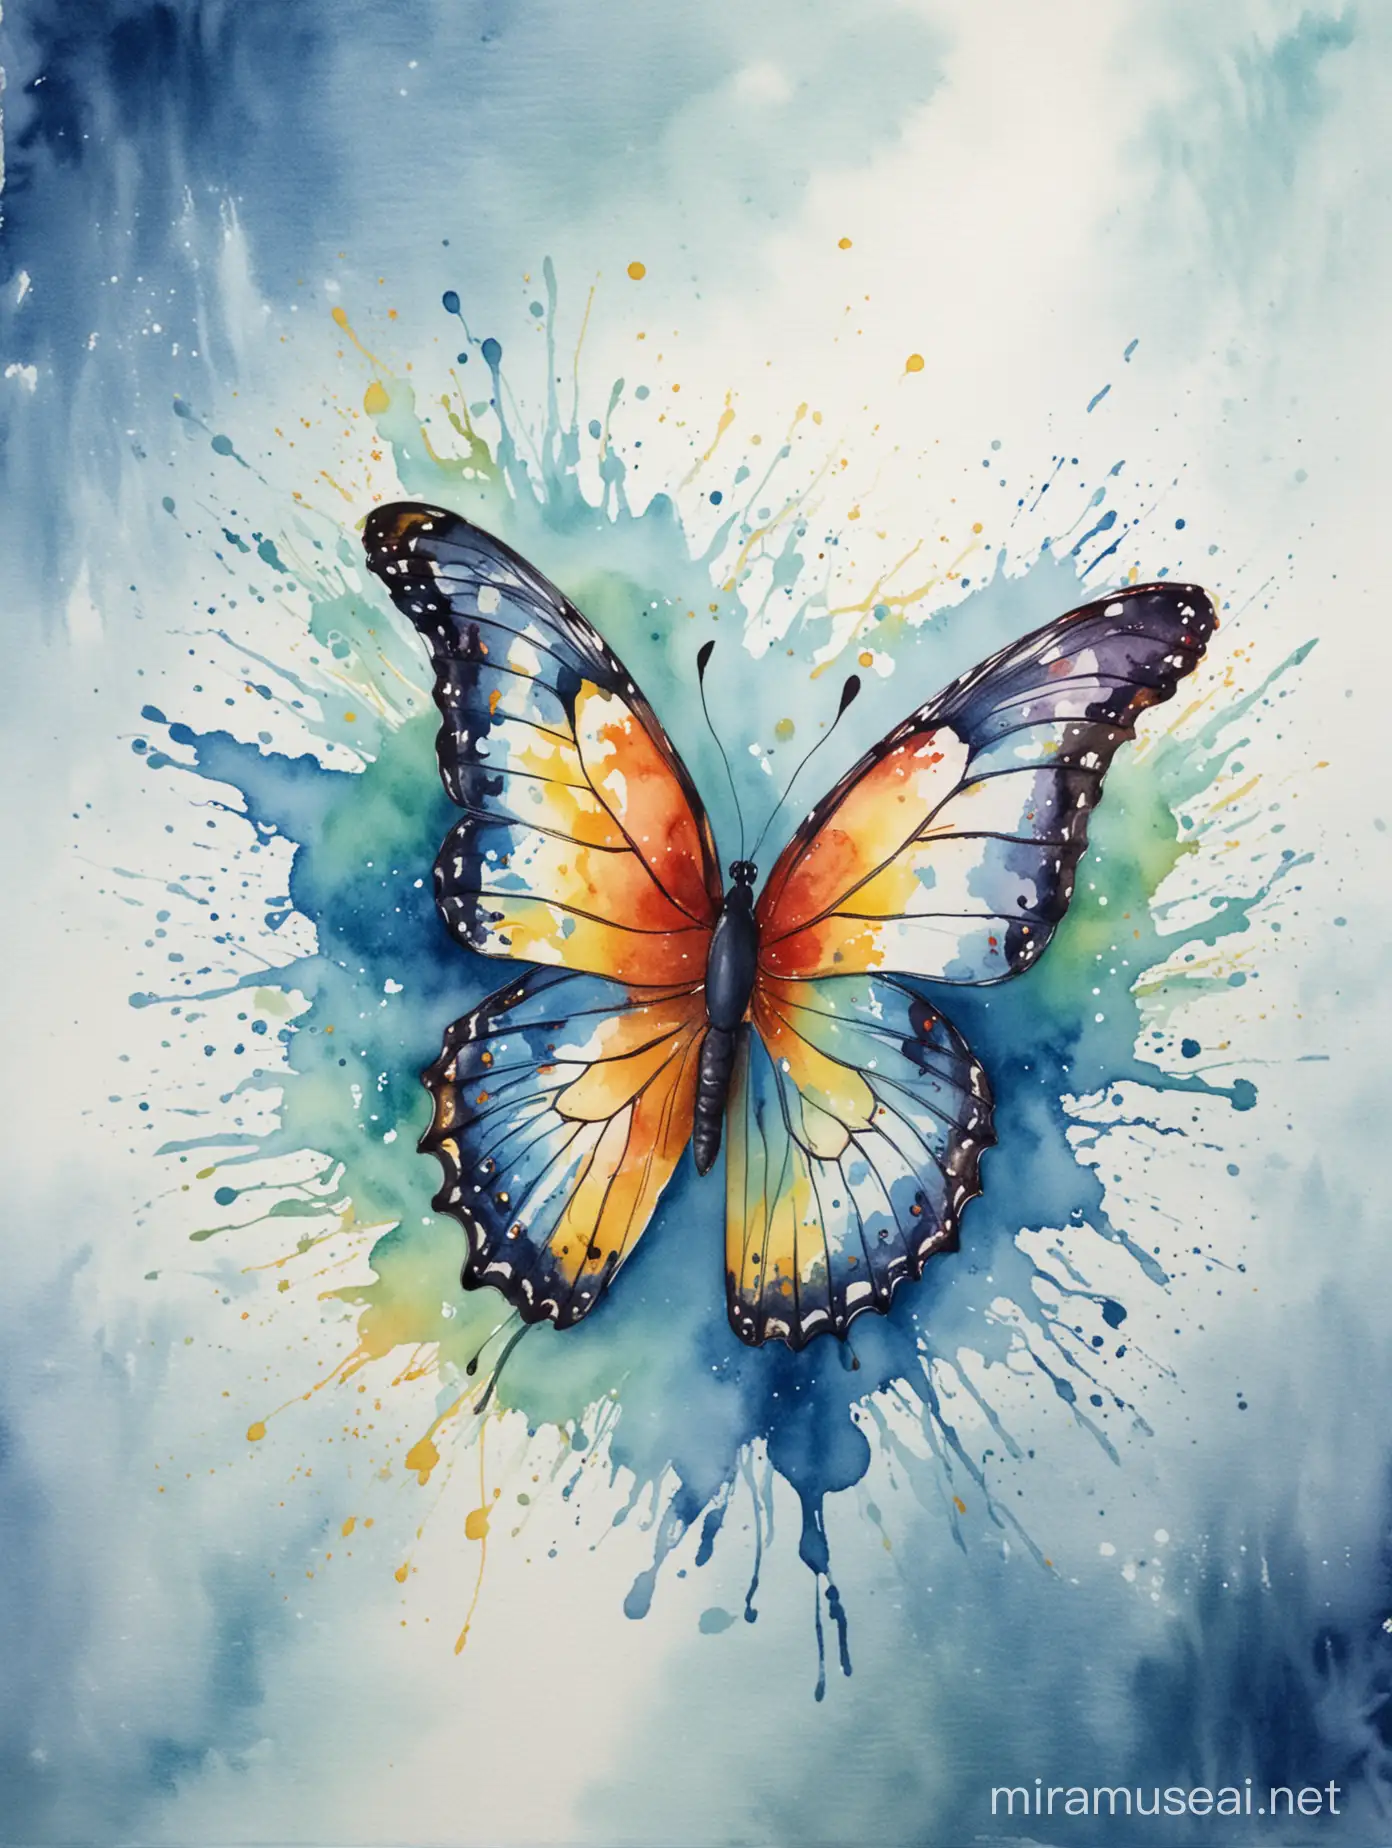 Abstract Watercolor Art Autism Awareness with Butterfly Symbolism